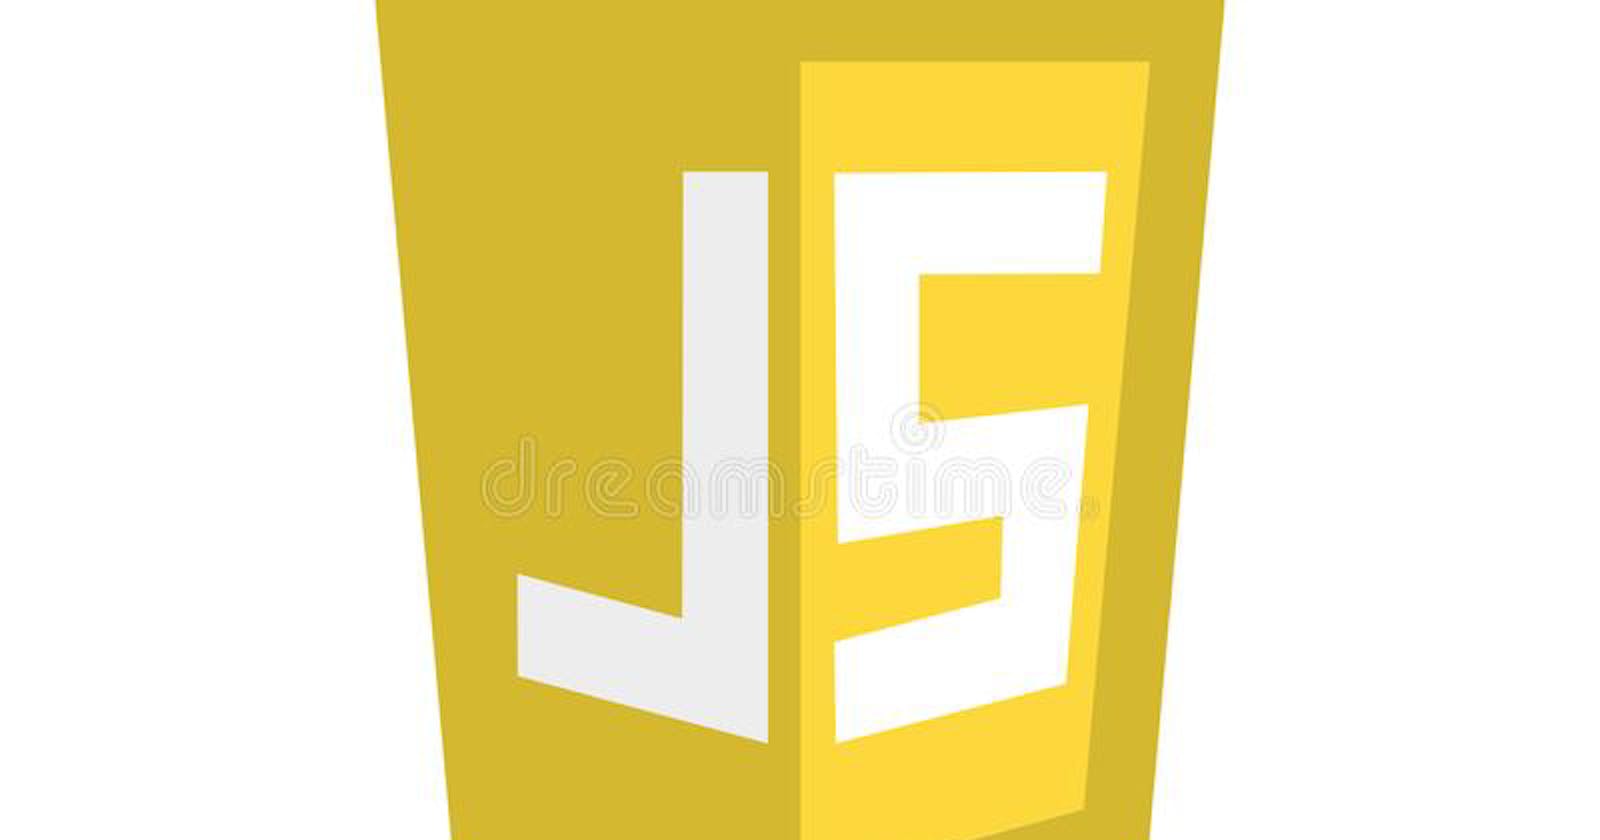 JavaScript meaning and uses